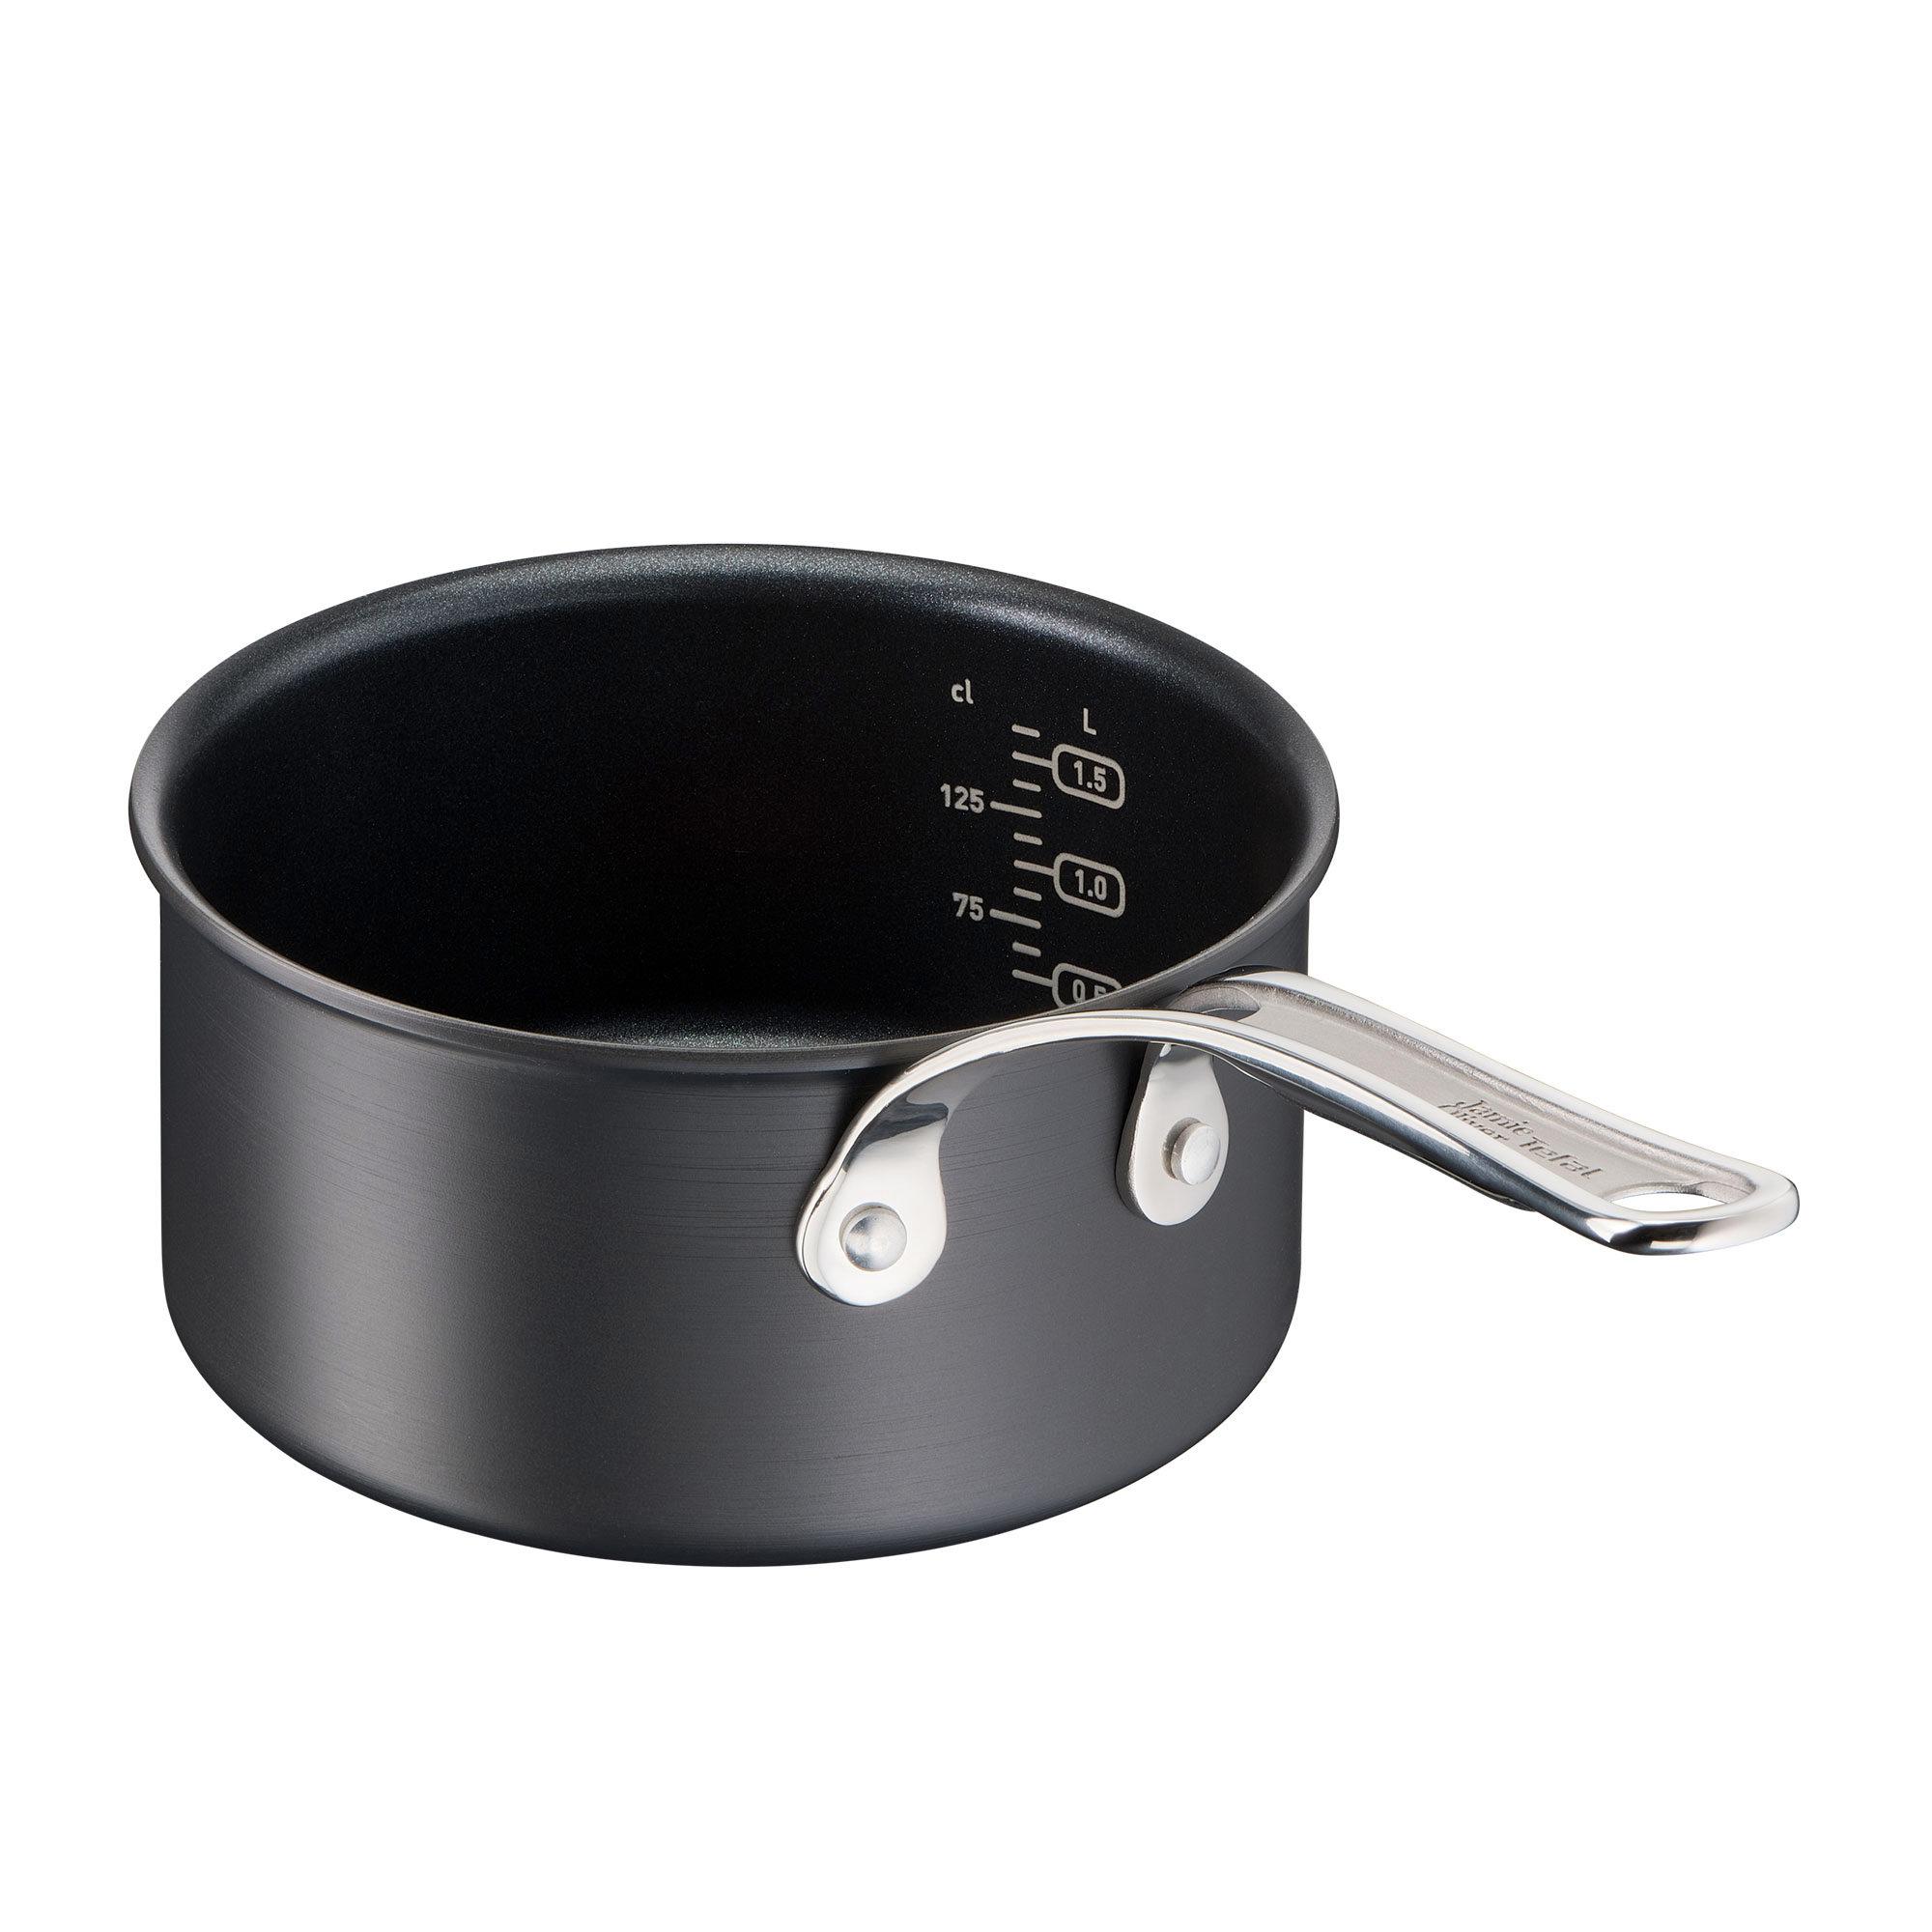 Jamie Oliver by Tefal Cook's Classic Non Stick Induction Saucepan 18cm - 2.2L Image 3